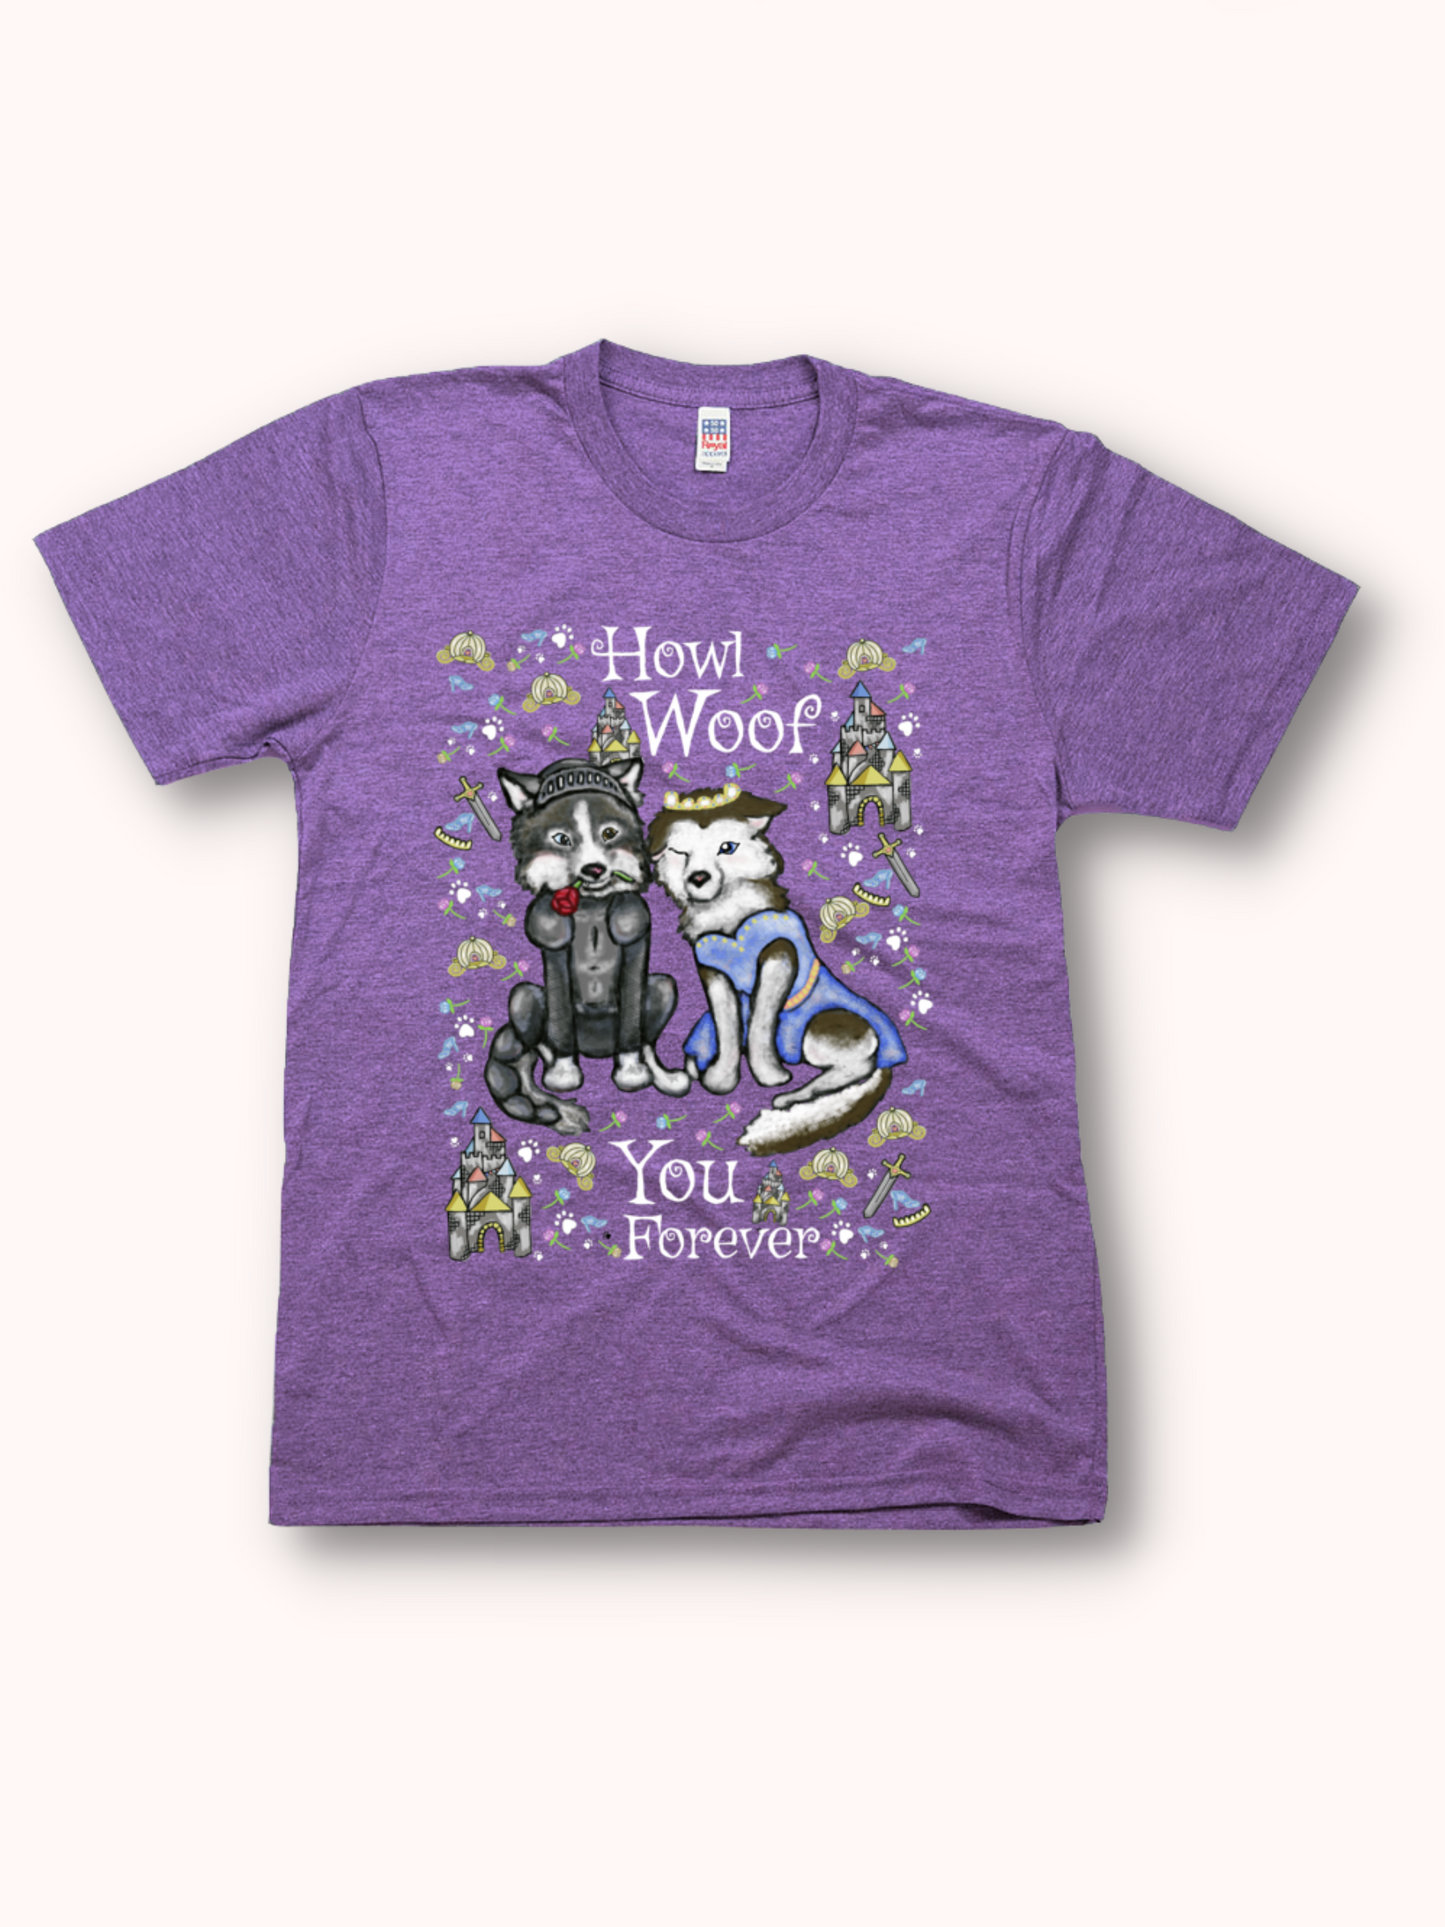 Howl Woof You - Unisex - Eco-Friendly USA Made Jersey Tee